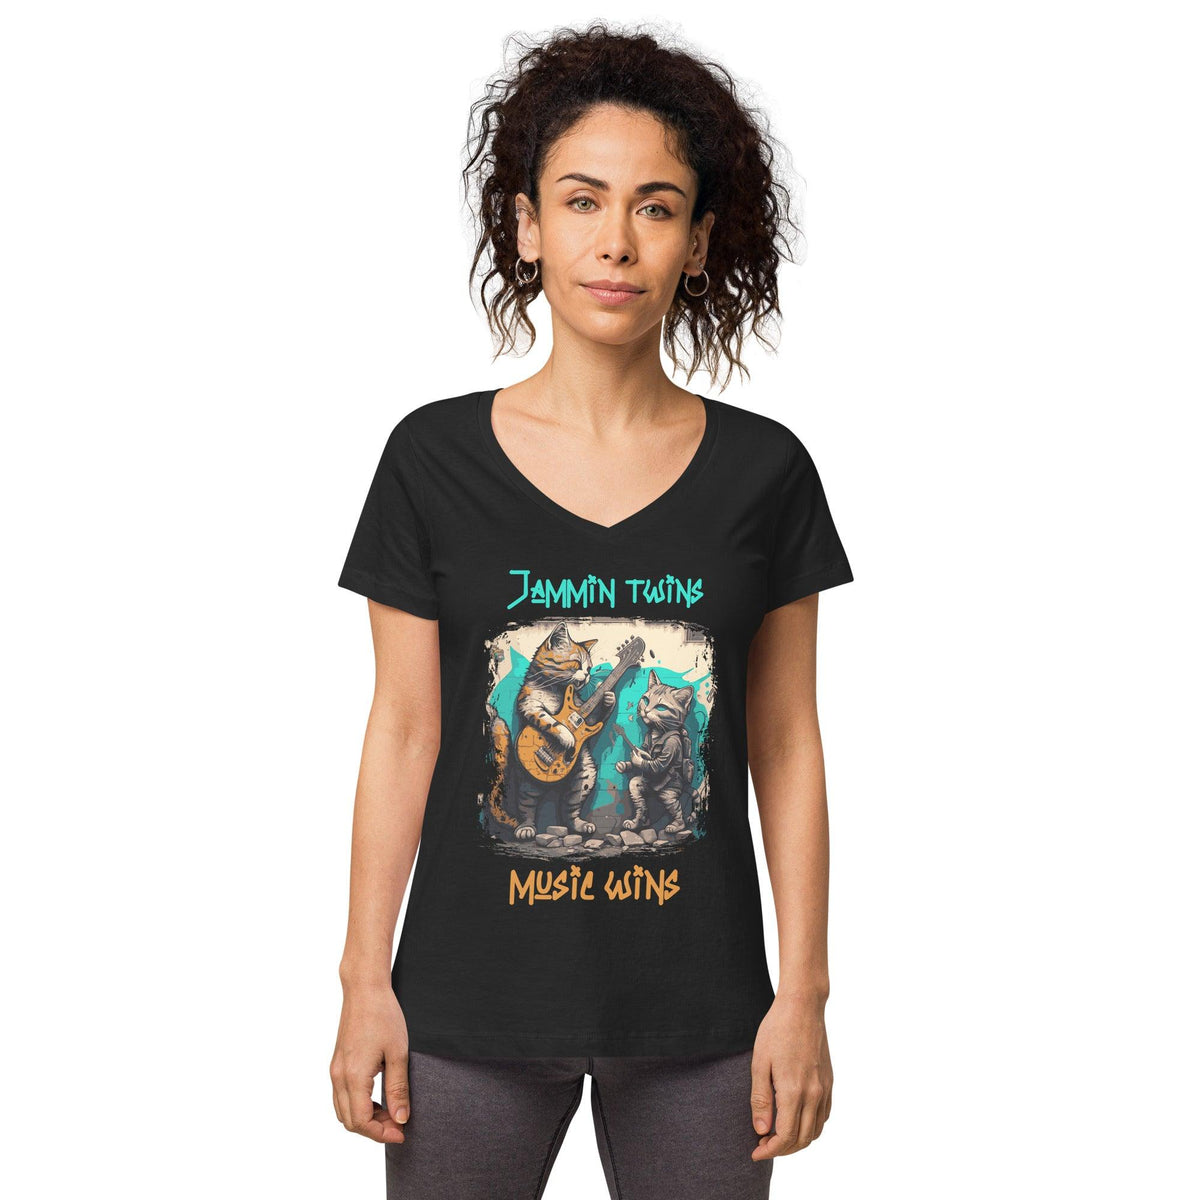 Music wins women’s fitted v-neck t-shirt - Beyond T-shirts